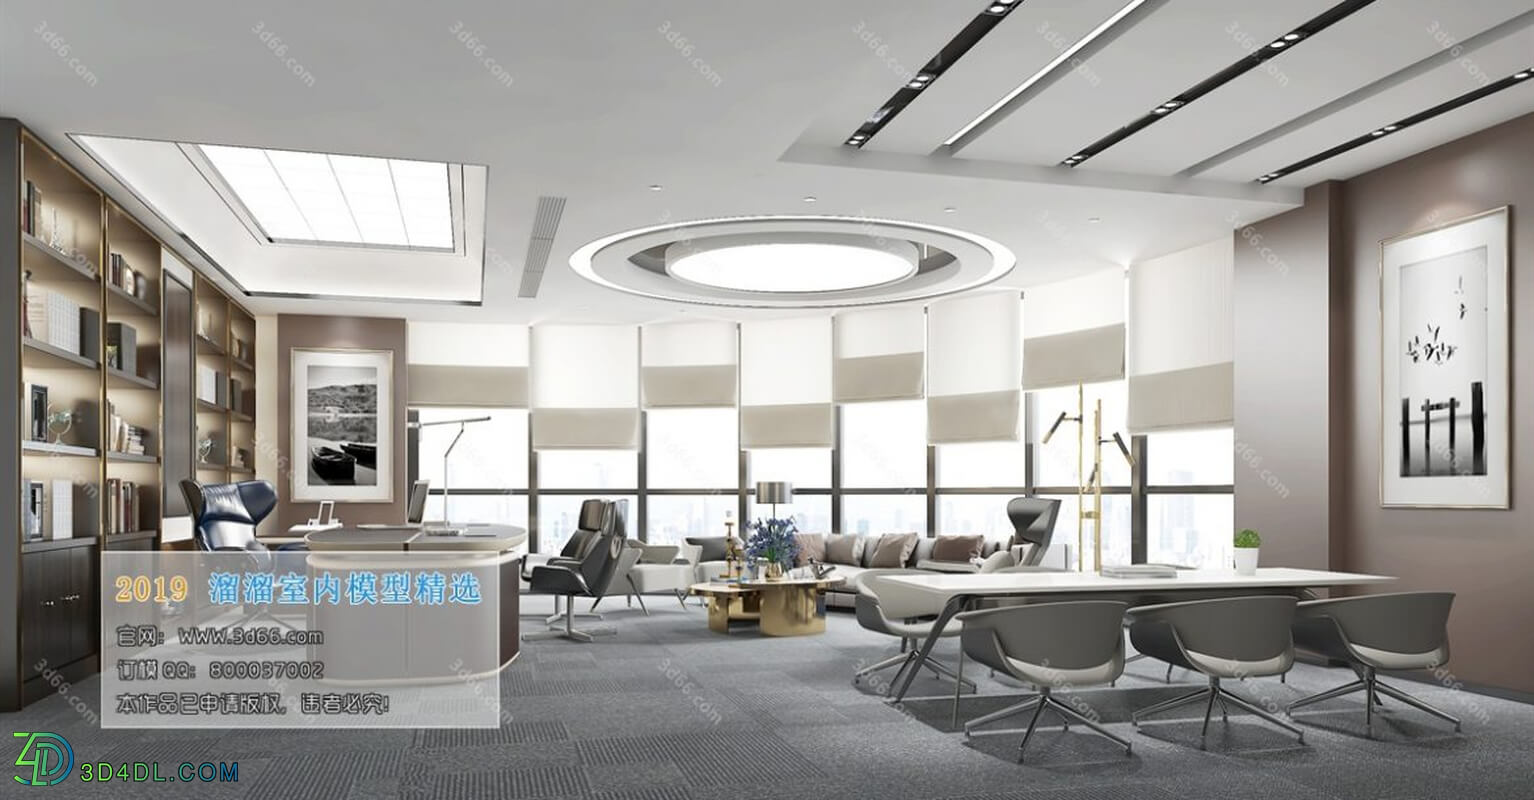 3D66 2019 Office & Meeting & Reception Room (001)